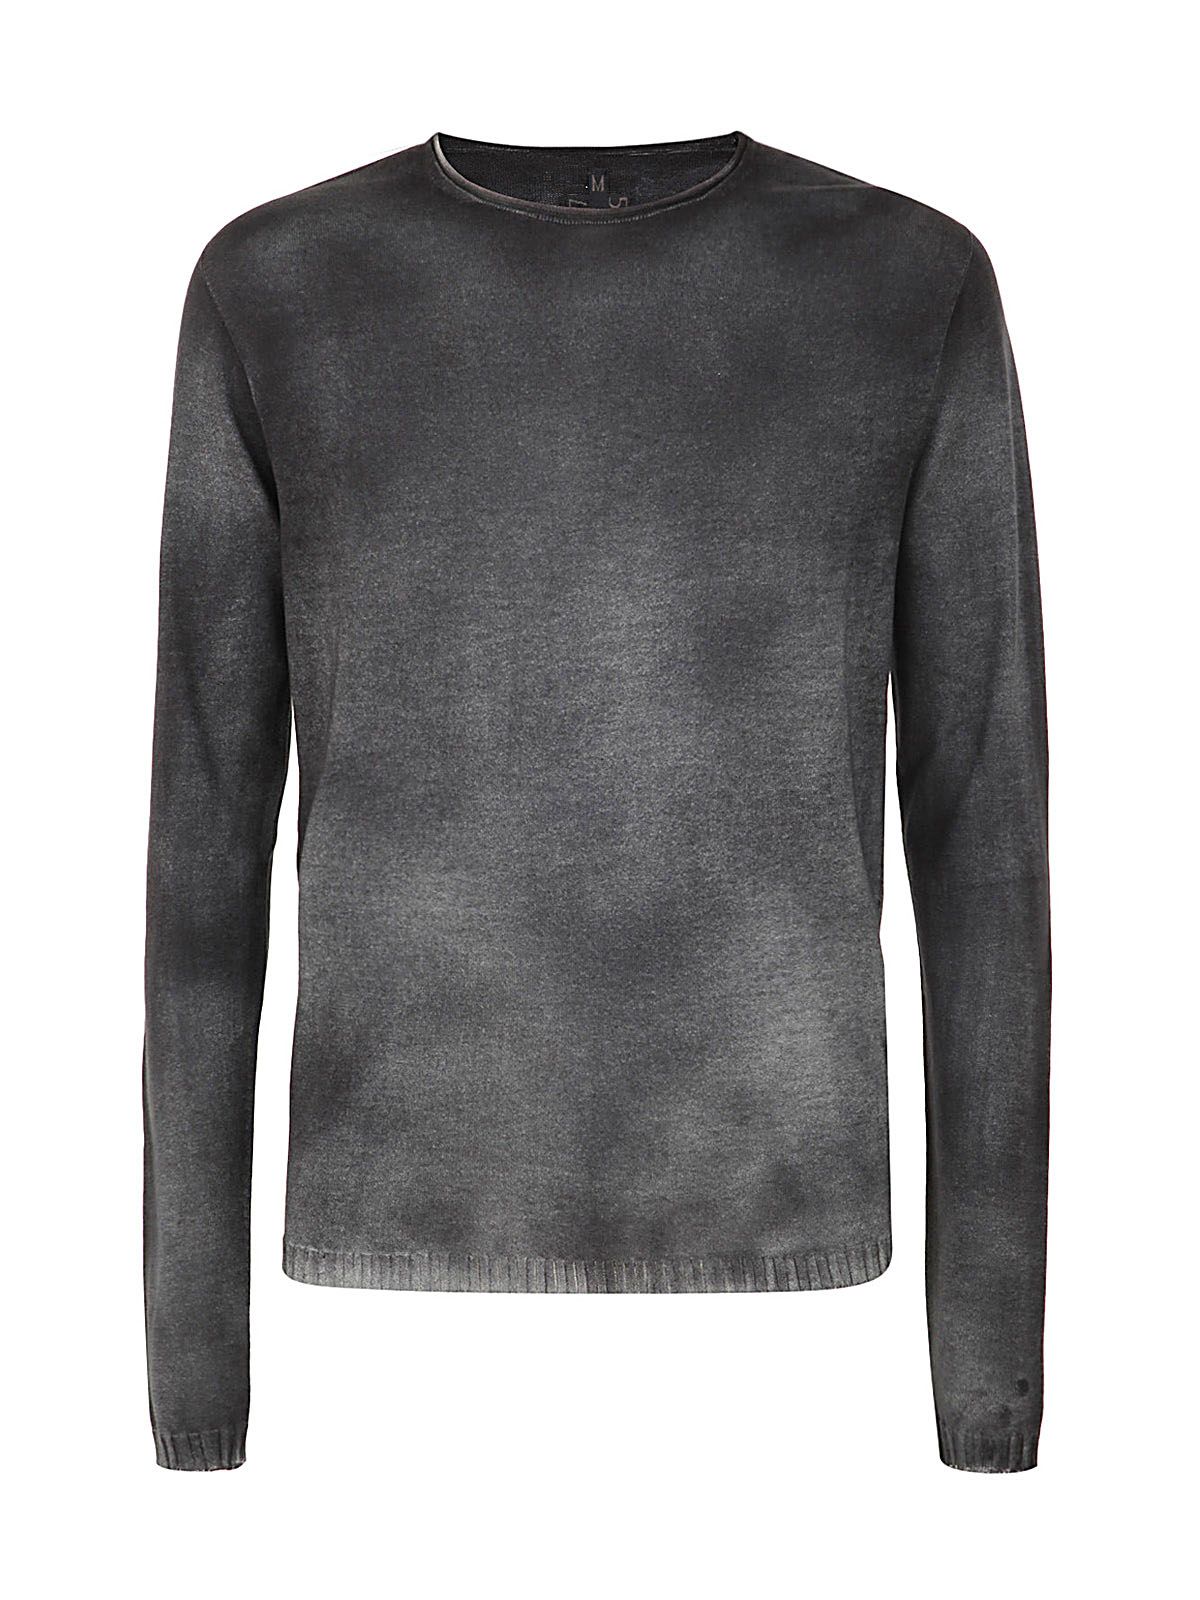 Md75 Regular Crew Neck Sweater With Ribbed Neck In Lead